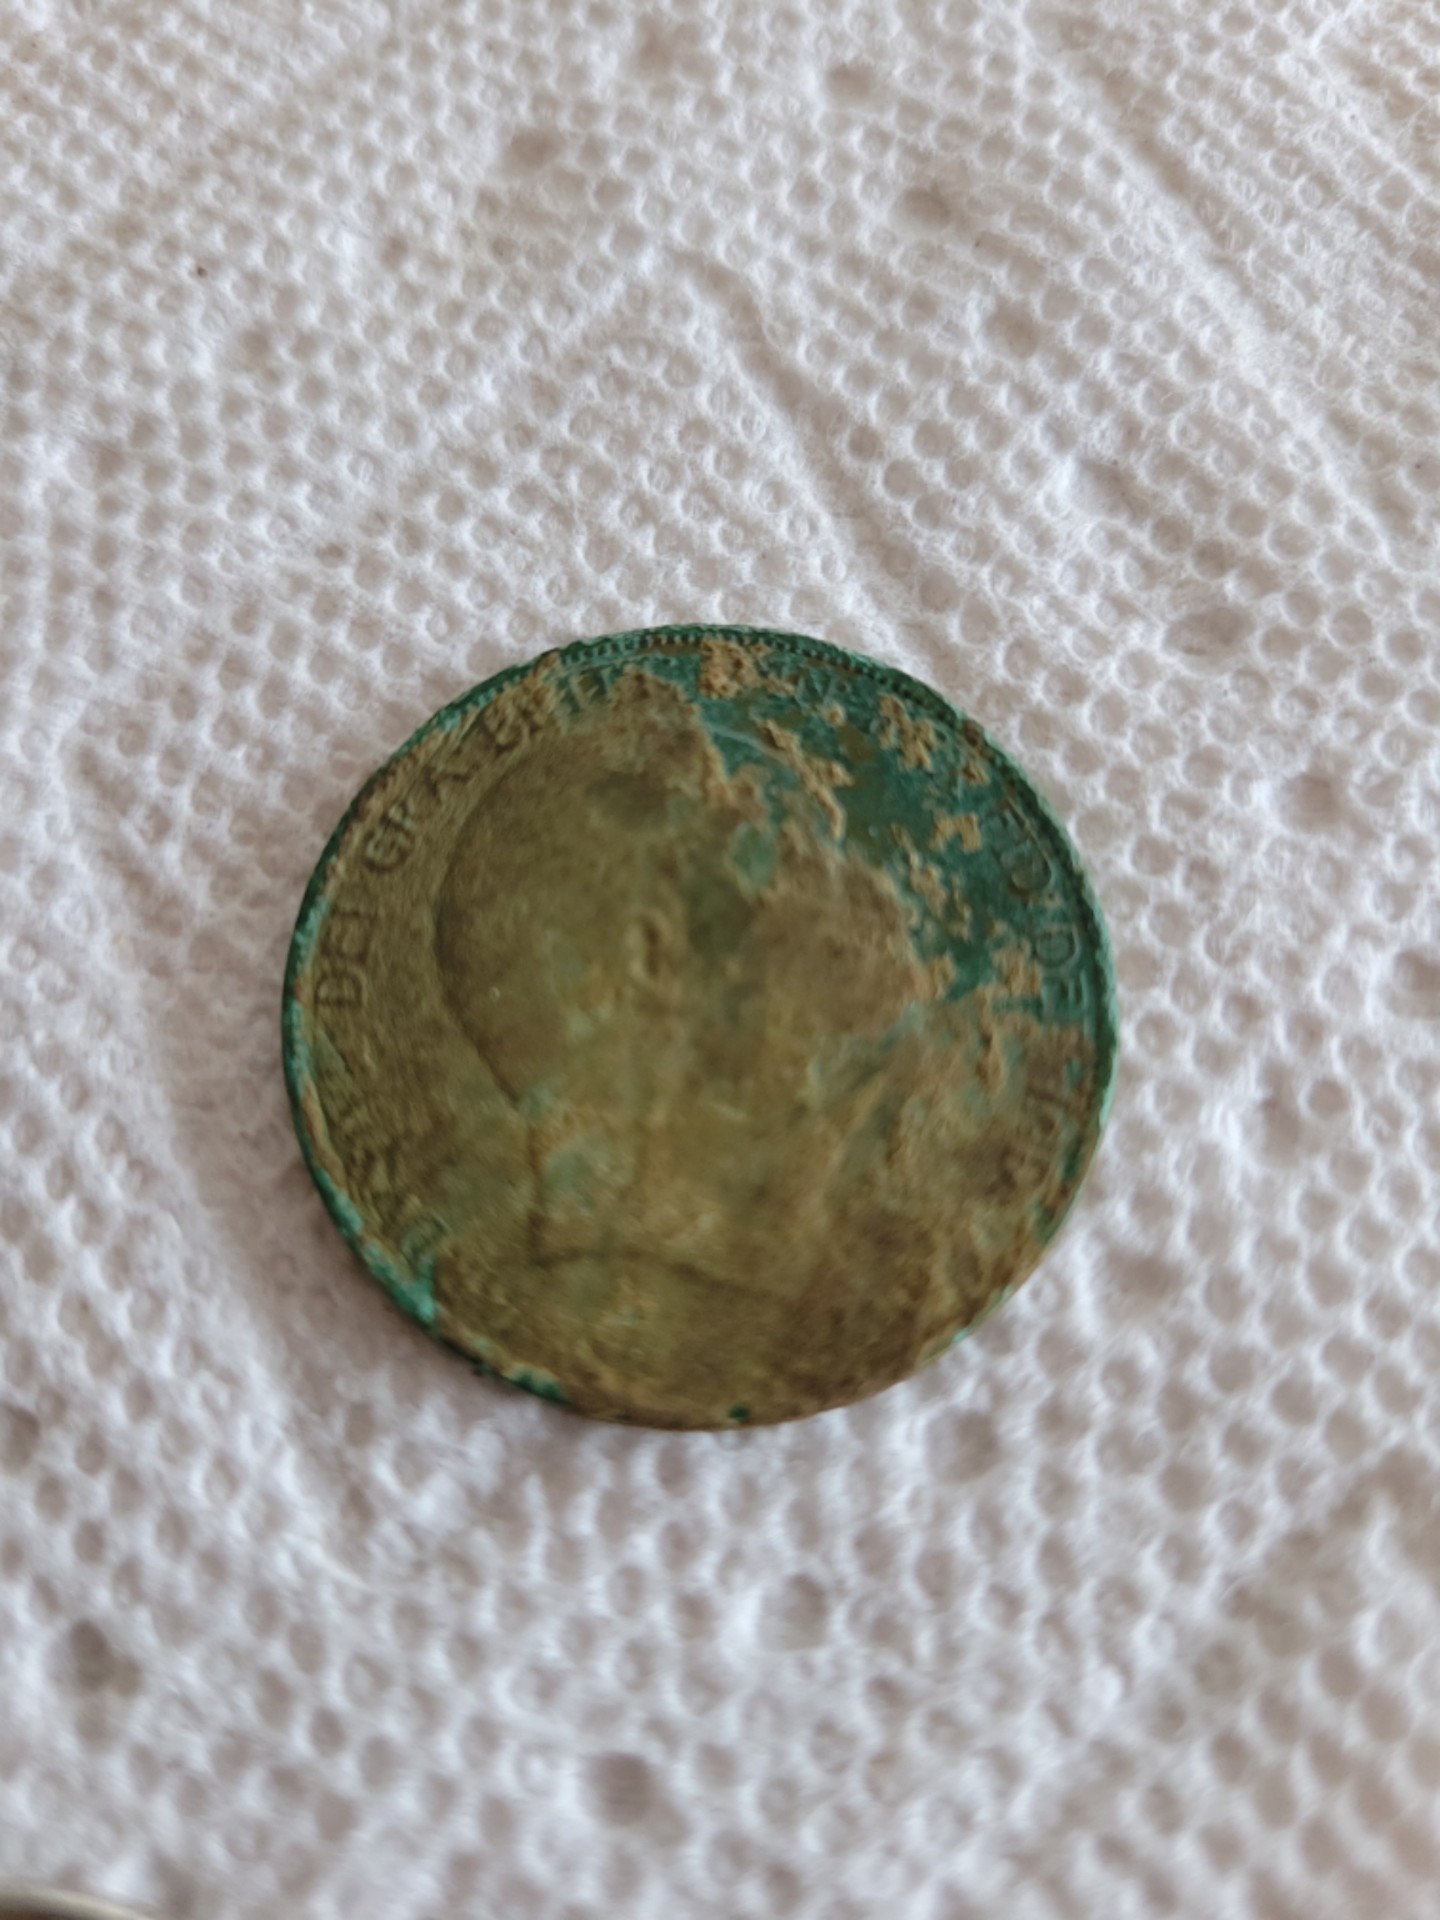 How to clean old coins – Discover Metal Detecting